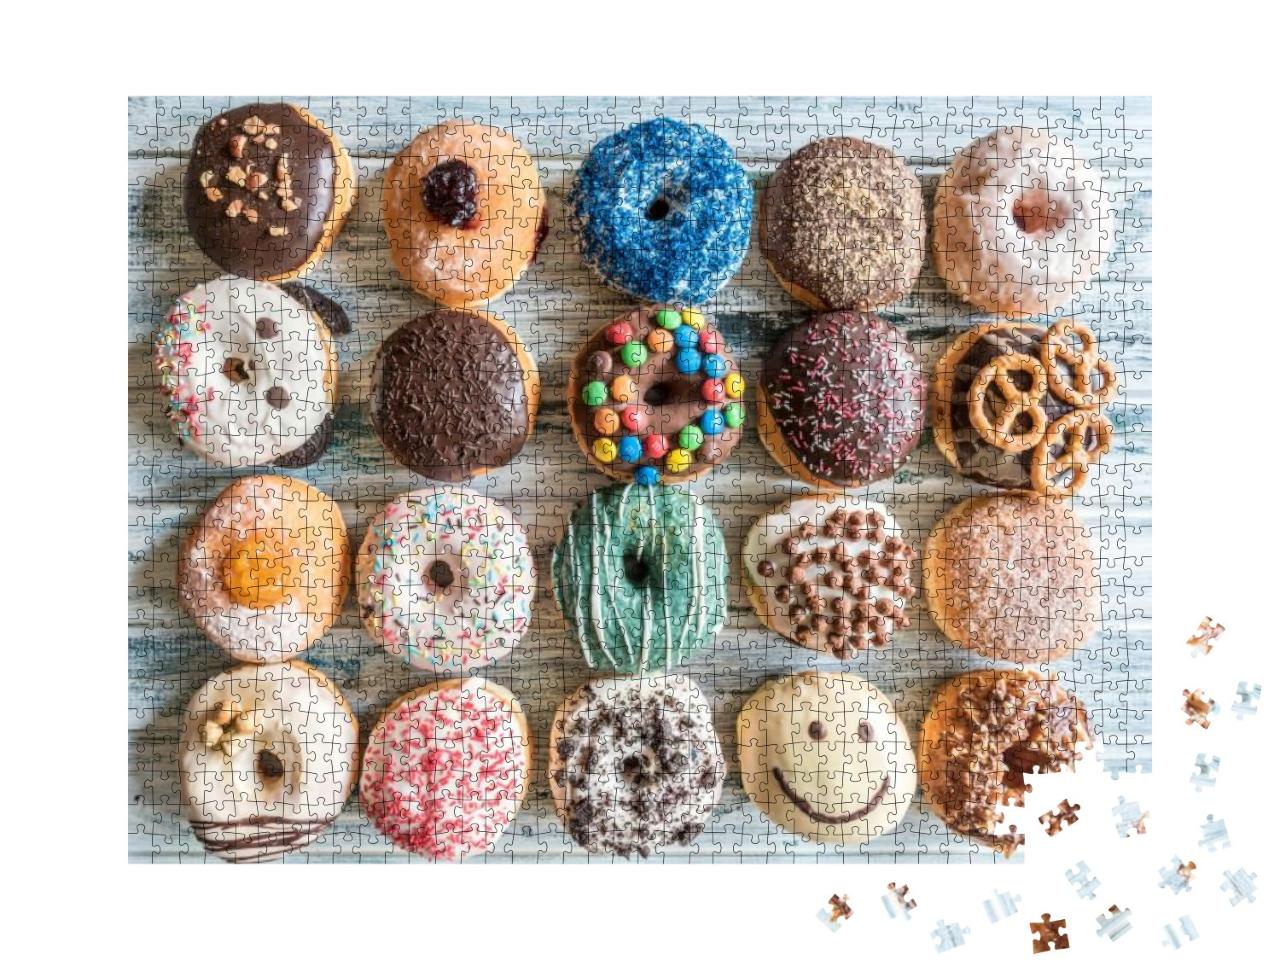 Many Sweet Glazed Donuts on the Table... Jigsaw Puzzle with 1000 pieces